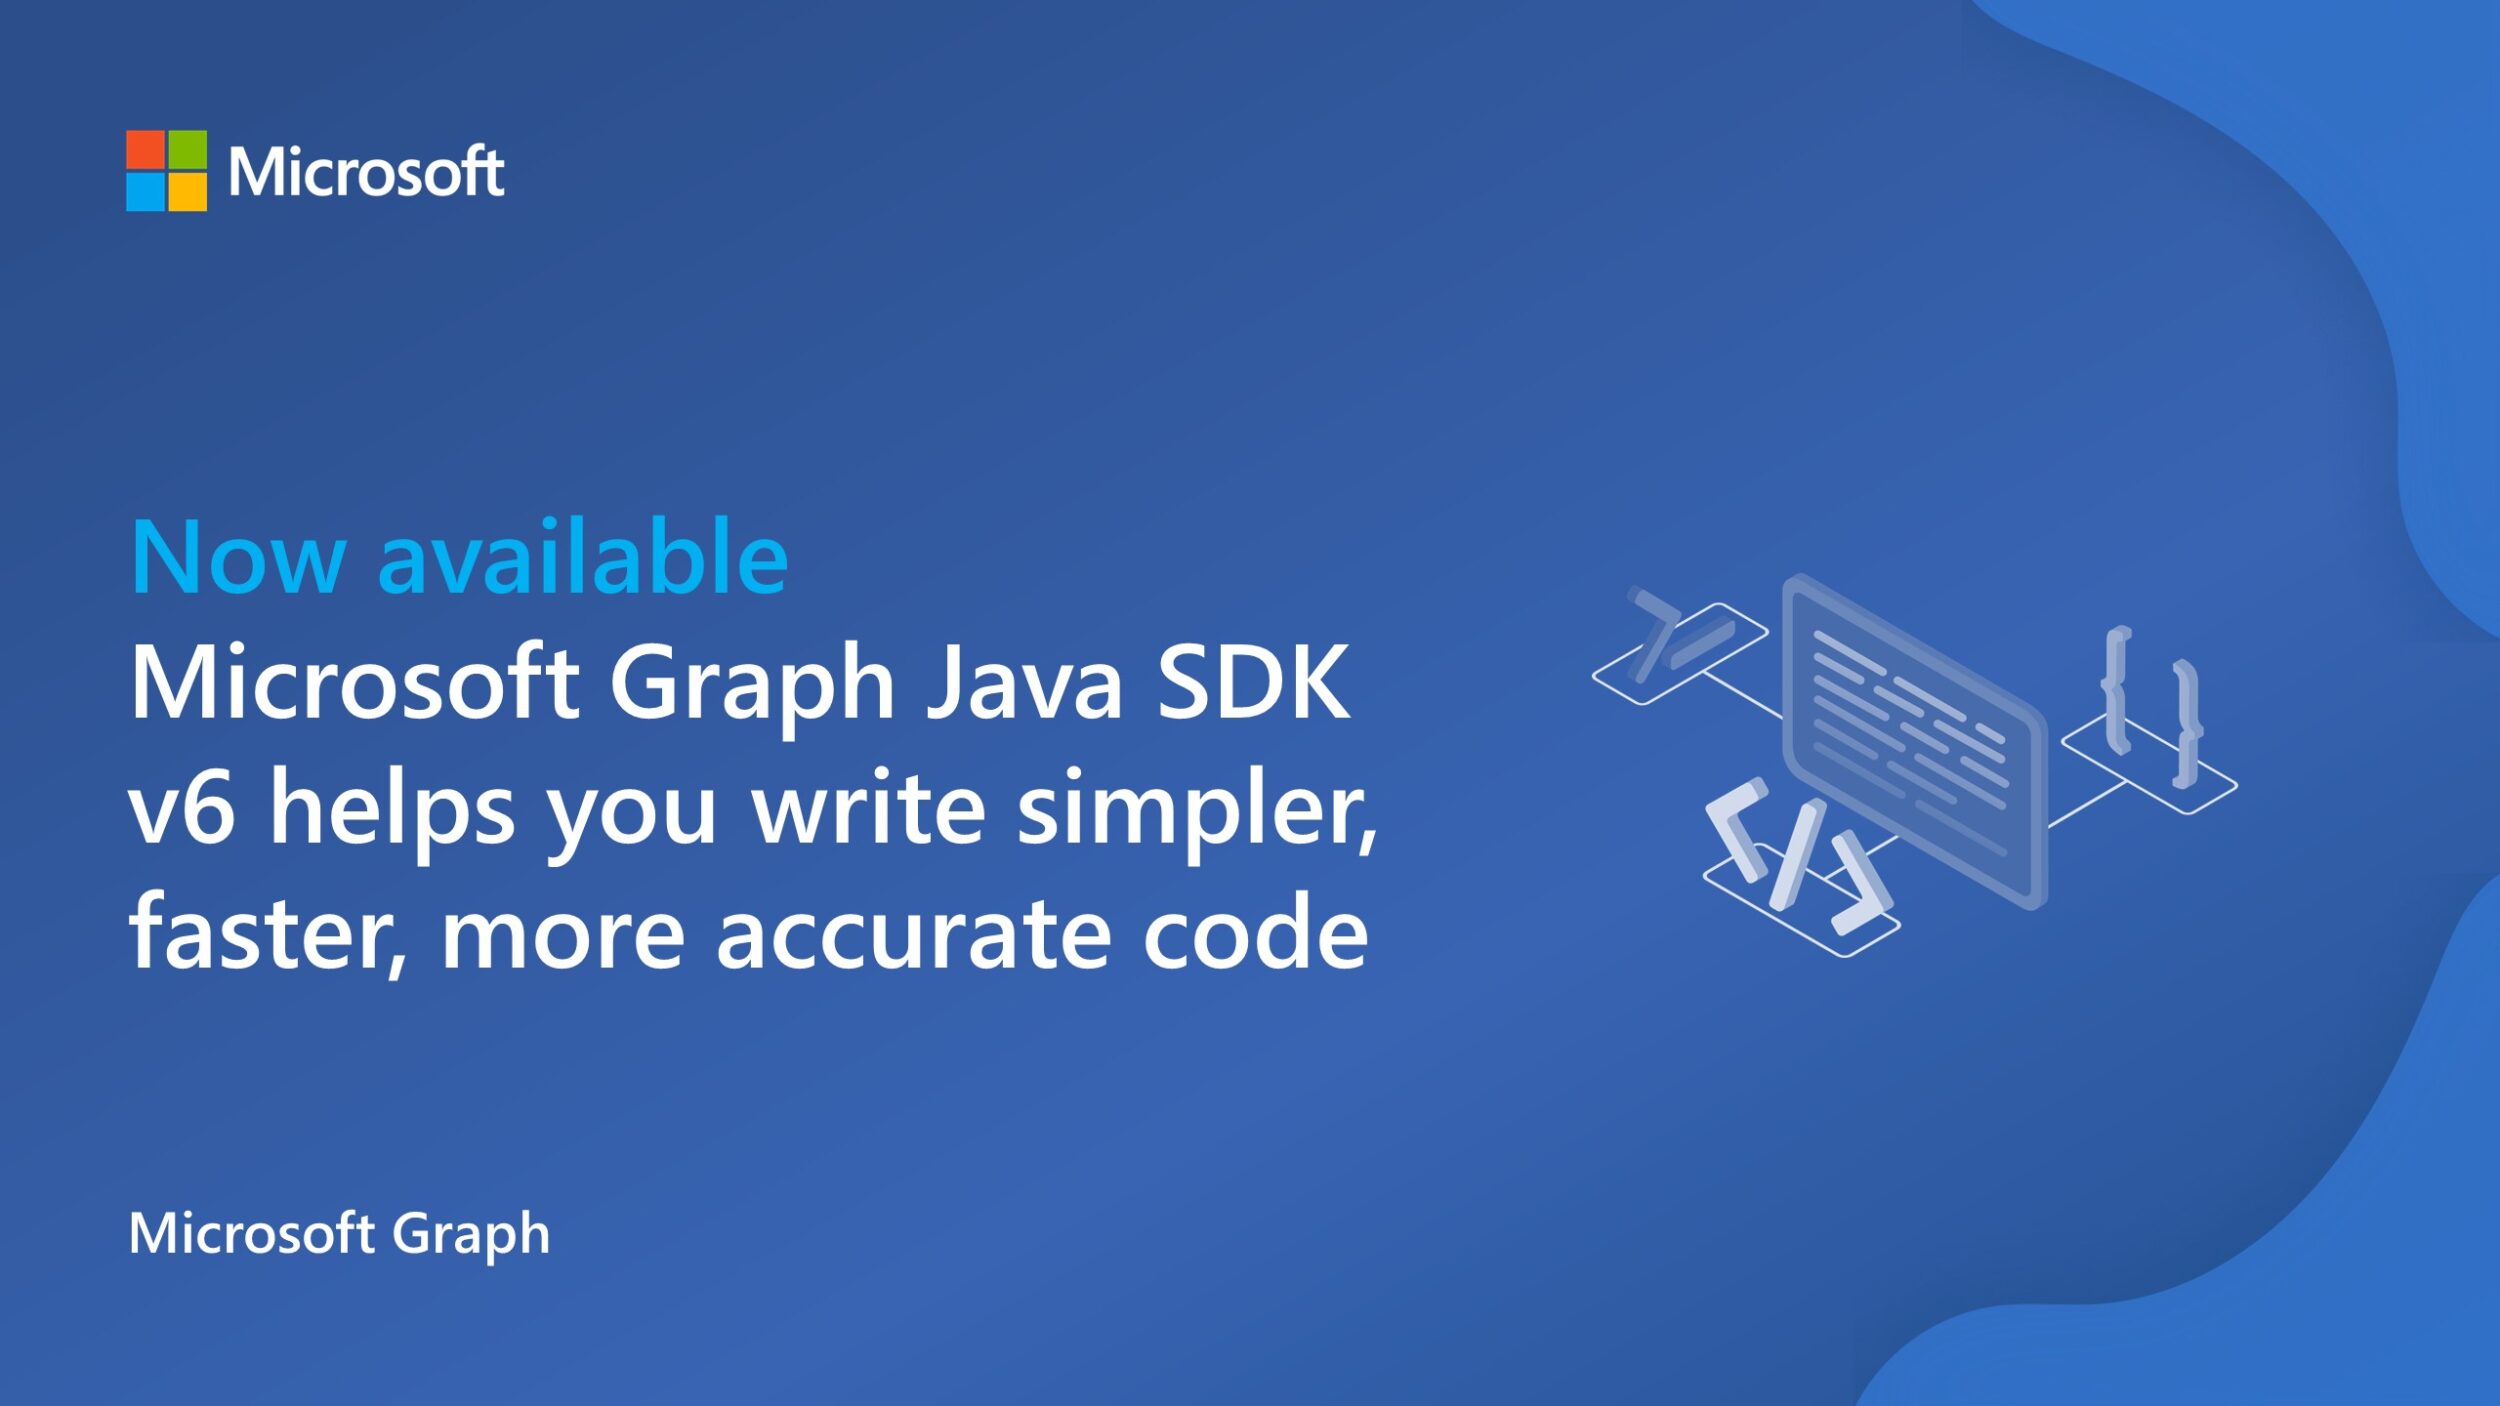 Microsoft Graph Java SDK v6, now generally available, helps you write simpler, faster and more accurate code